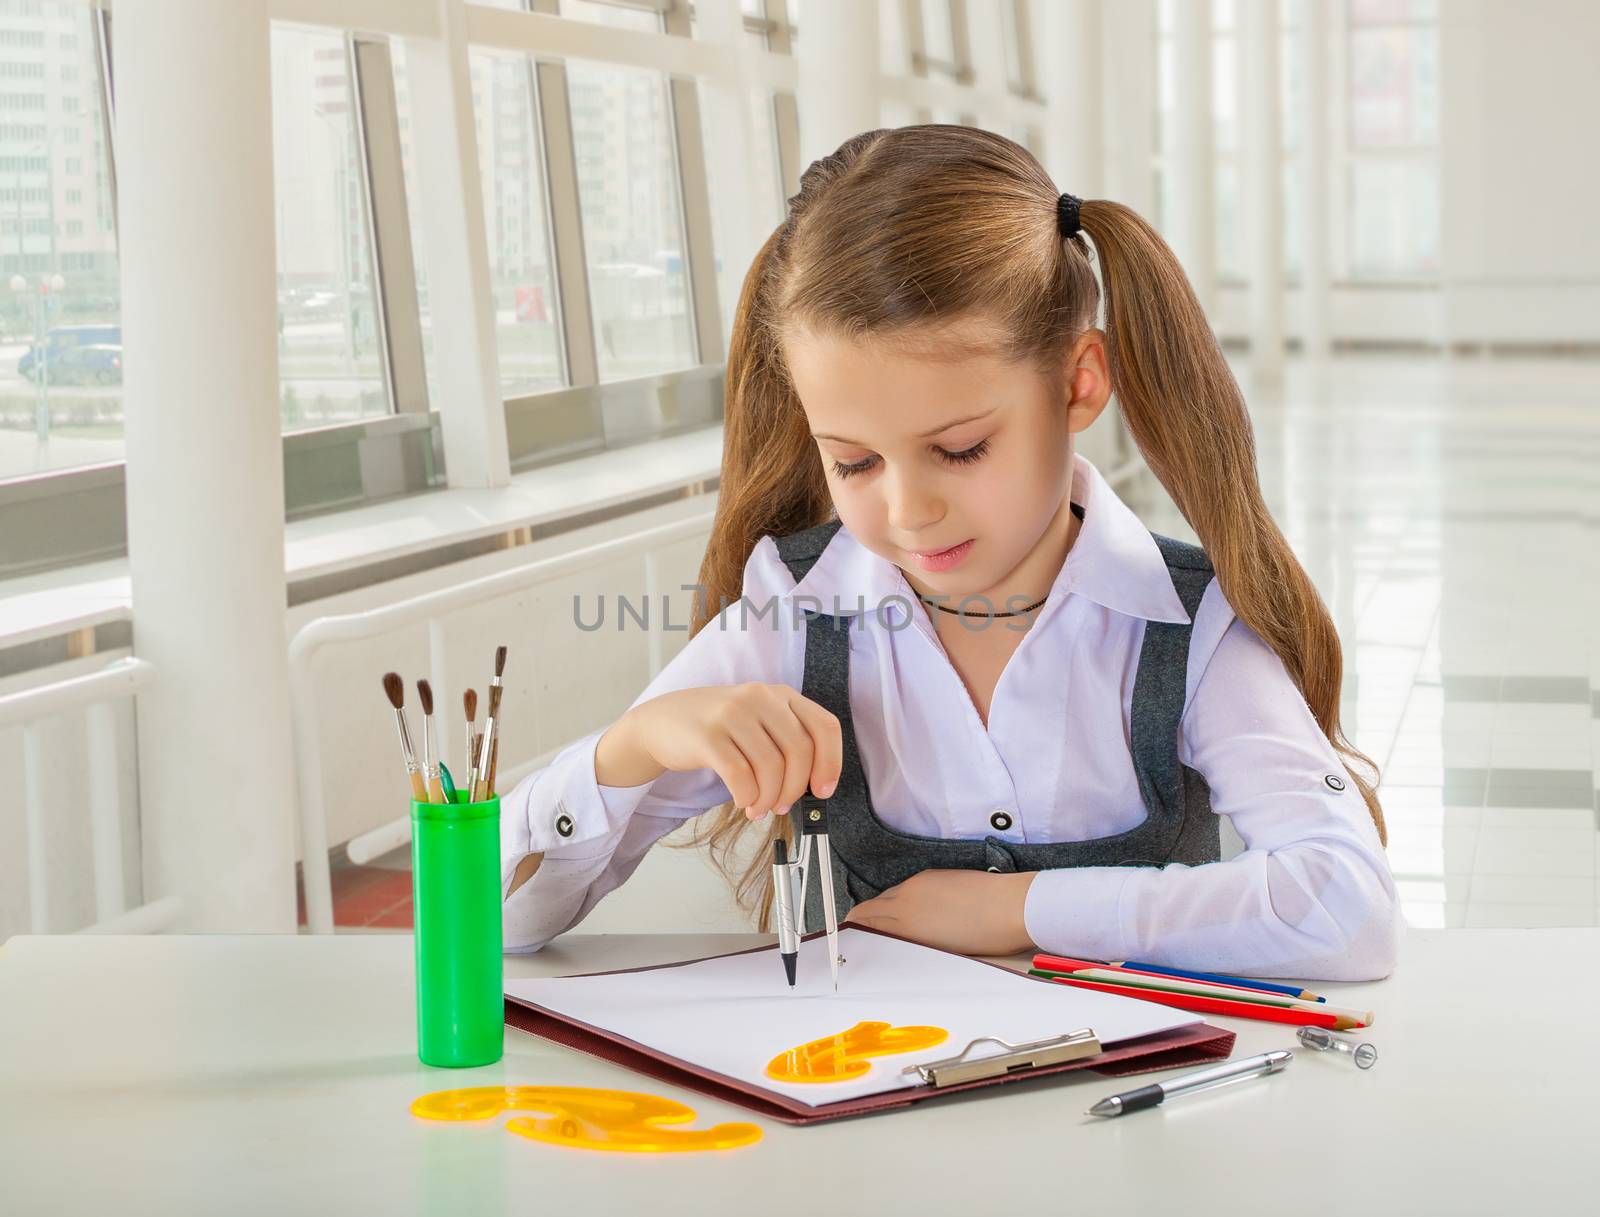 beautiful litle schoolgirl siiting at table and drawing with compass